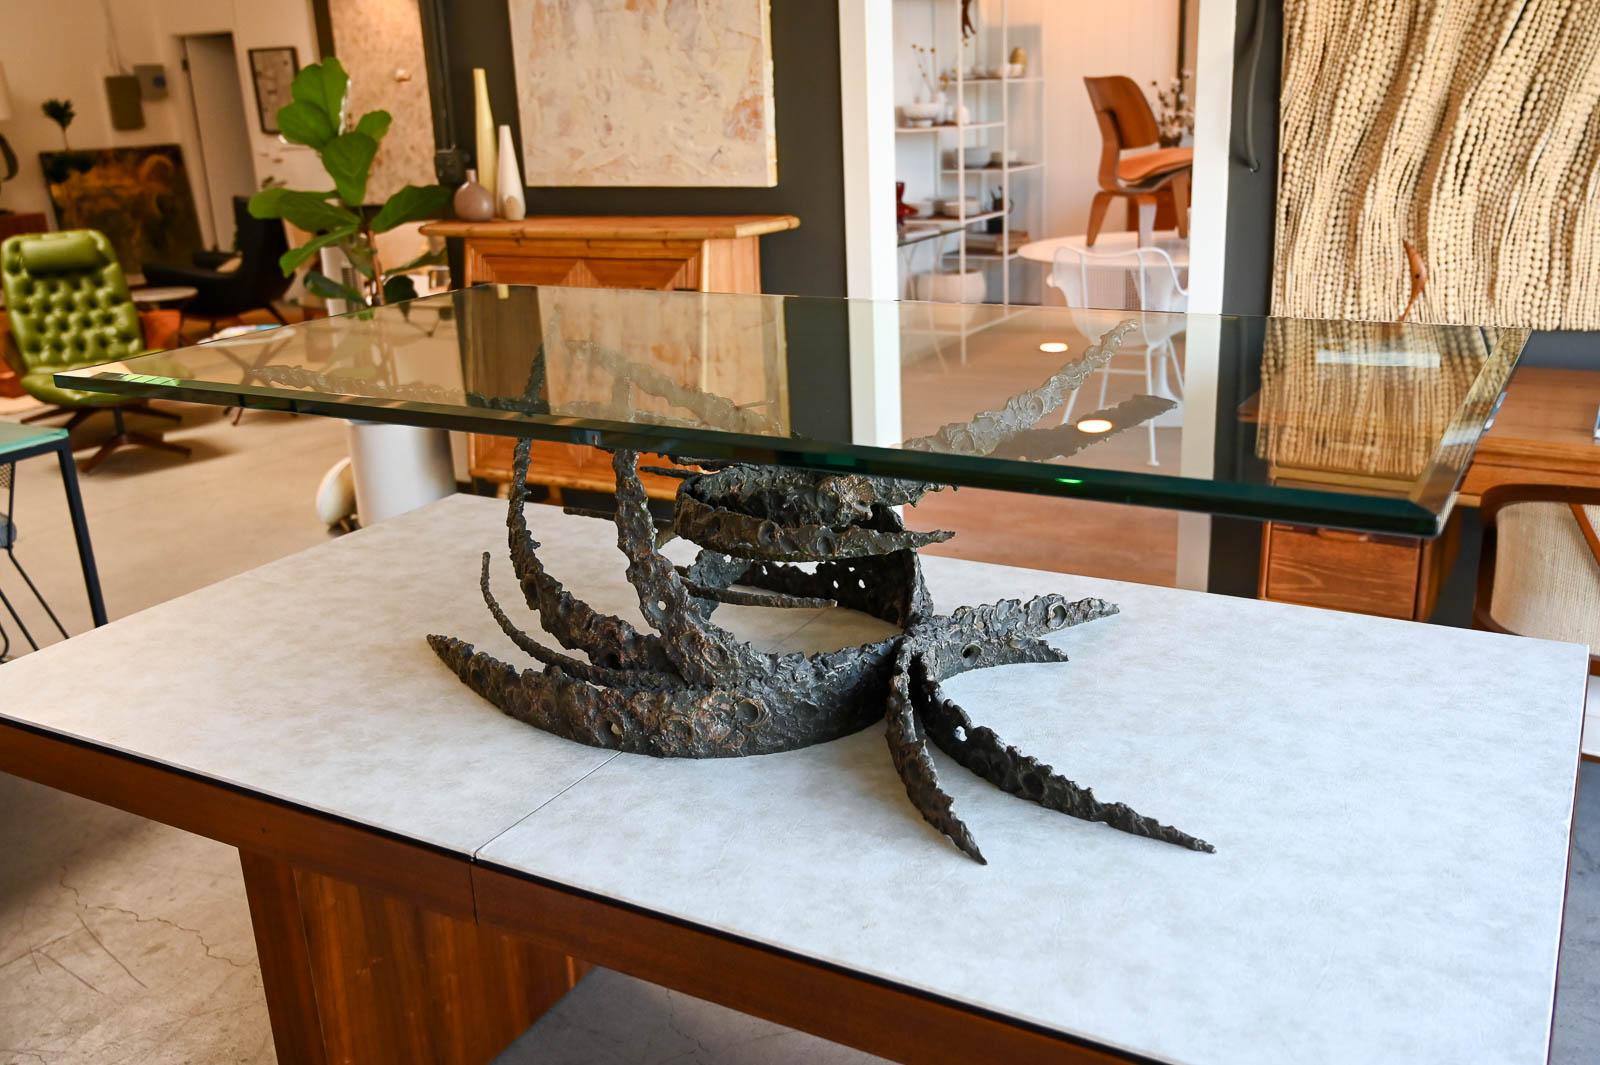 Cast Bronze Sculptural Brutalist Coffee Table by Daniel Gluck, ca. 1970 For Sale 3